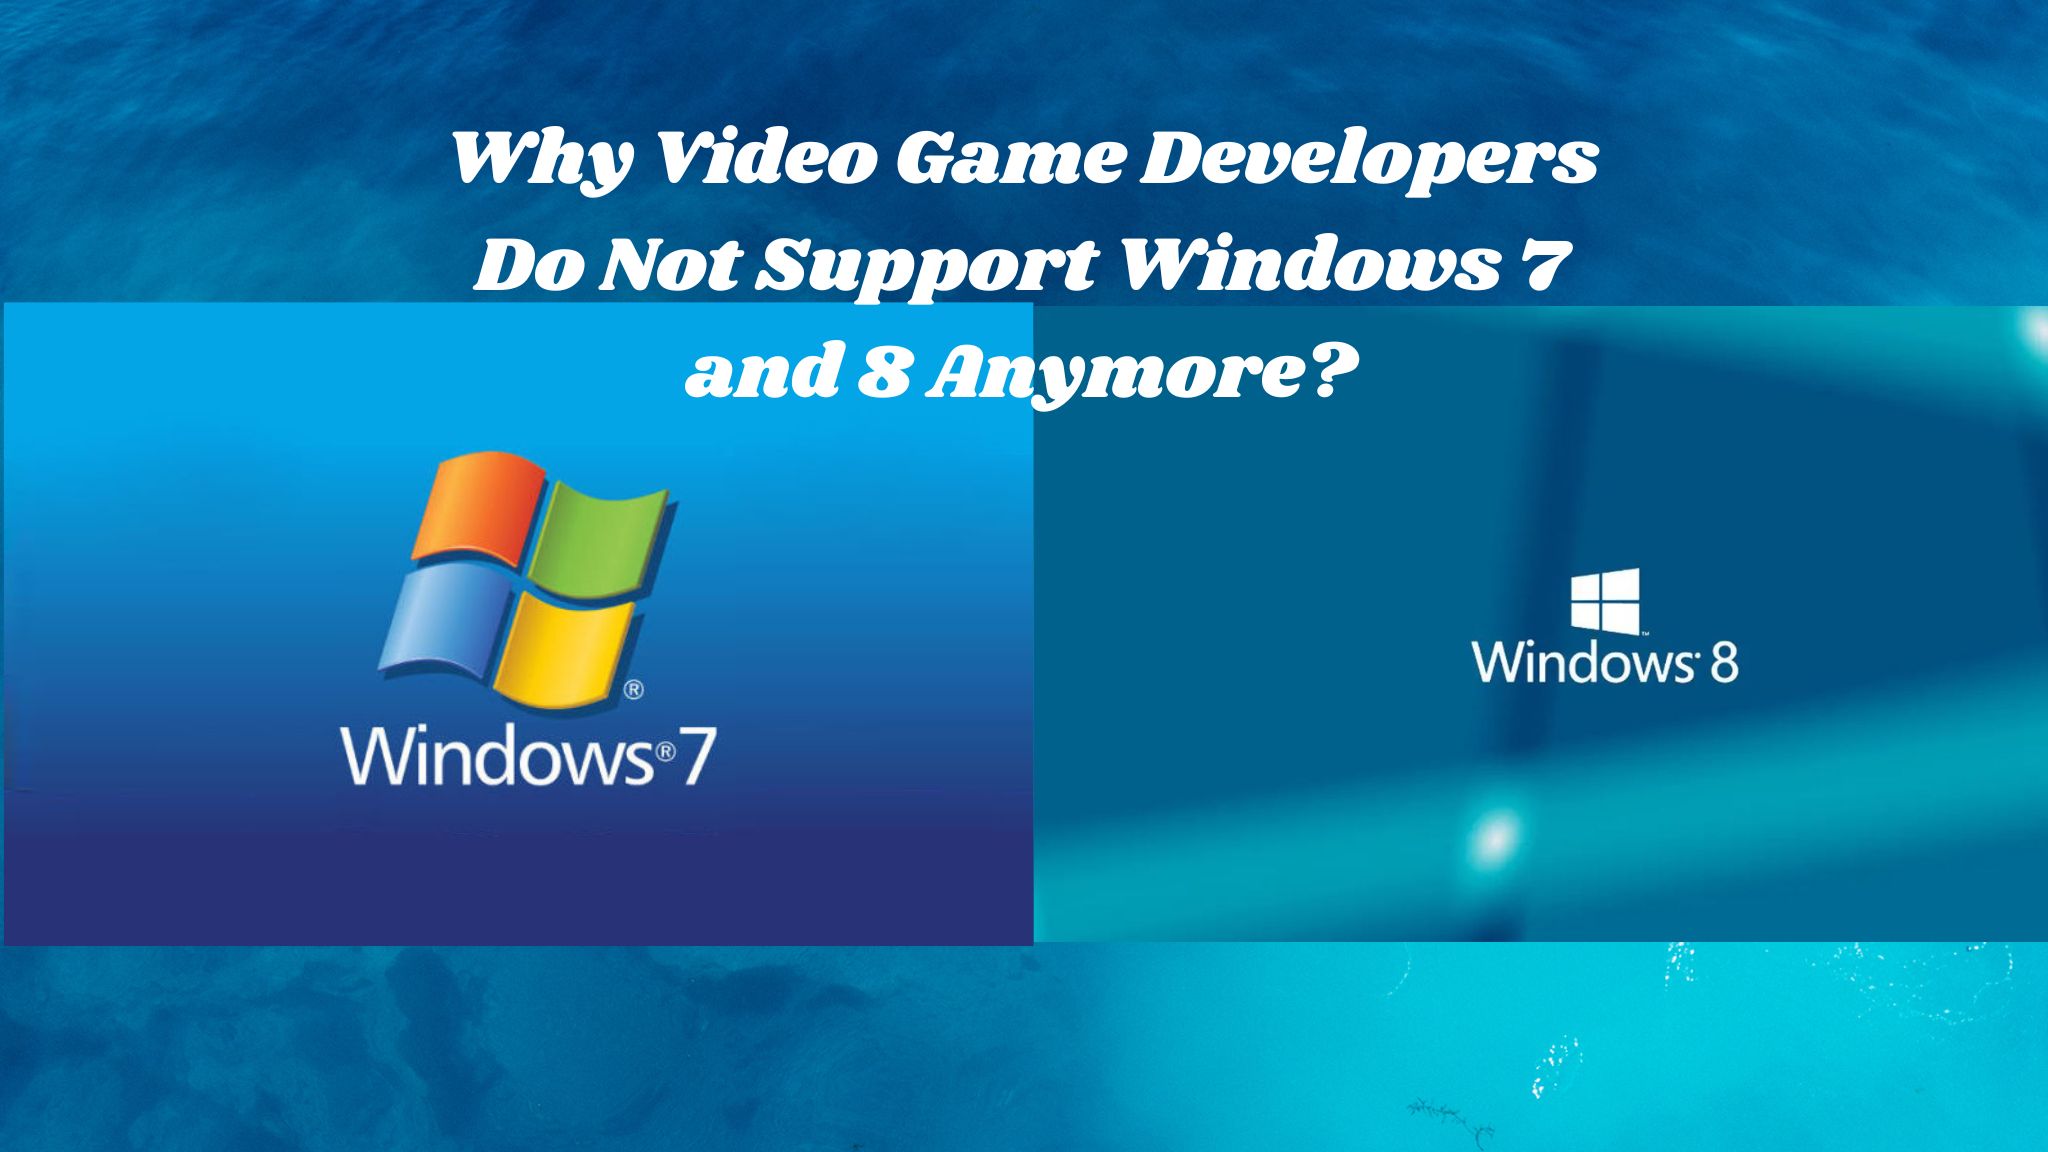 Why Video Game Developers Do Not Support Windows 7 and 8 Anymore?